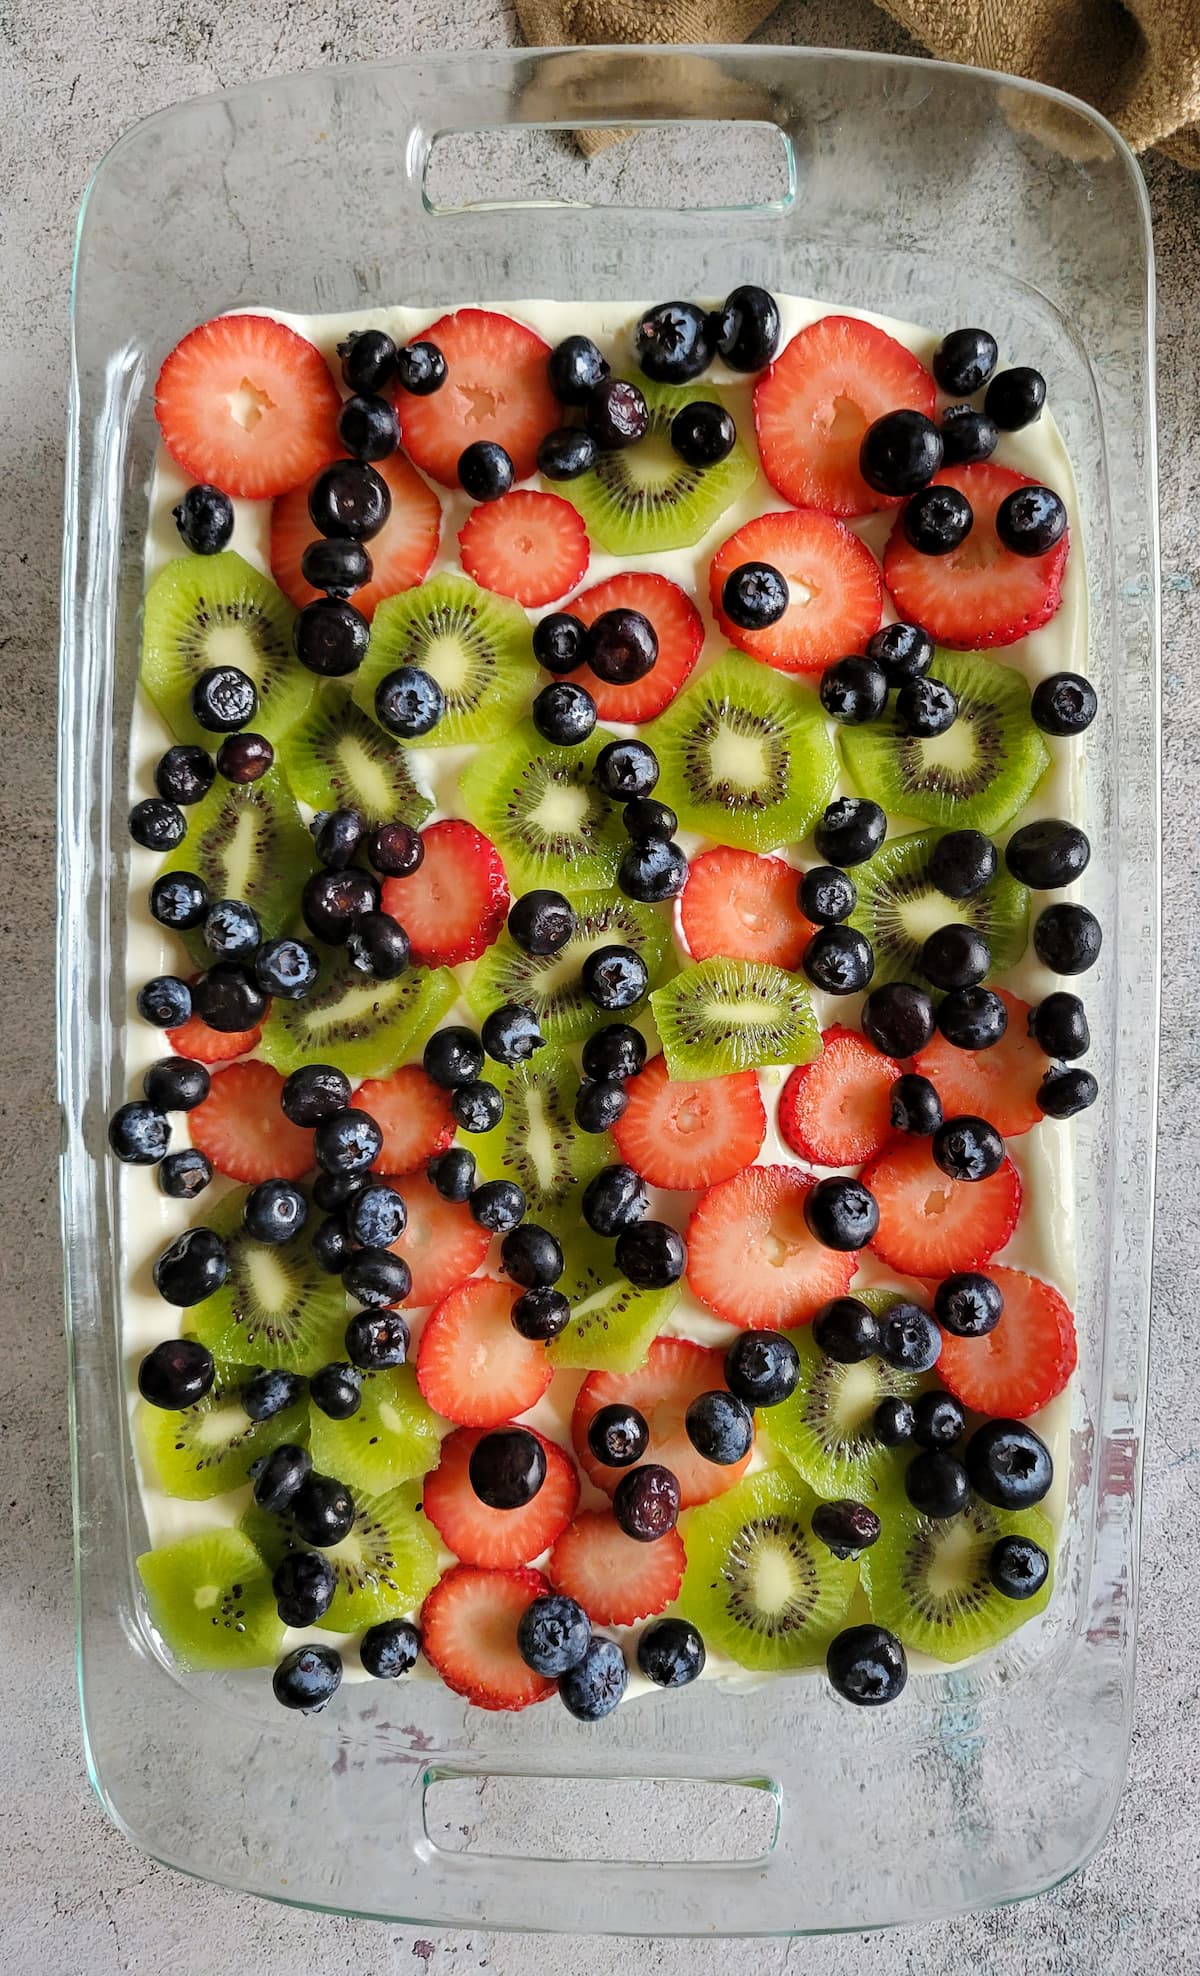 sliced kiwi, strawberries and blueberries on top of cream in a glass baking dish